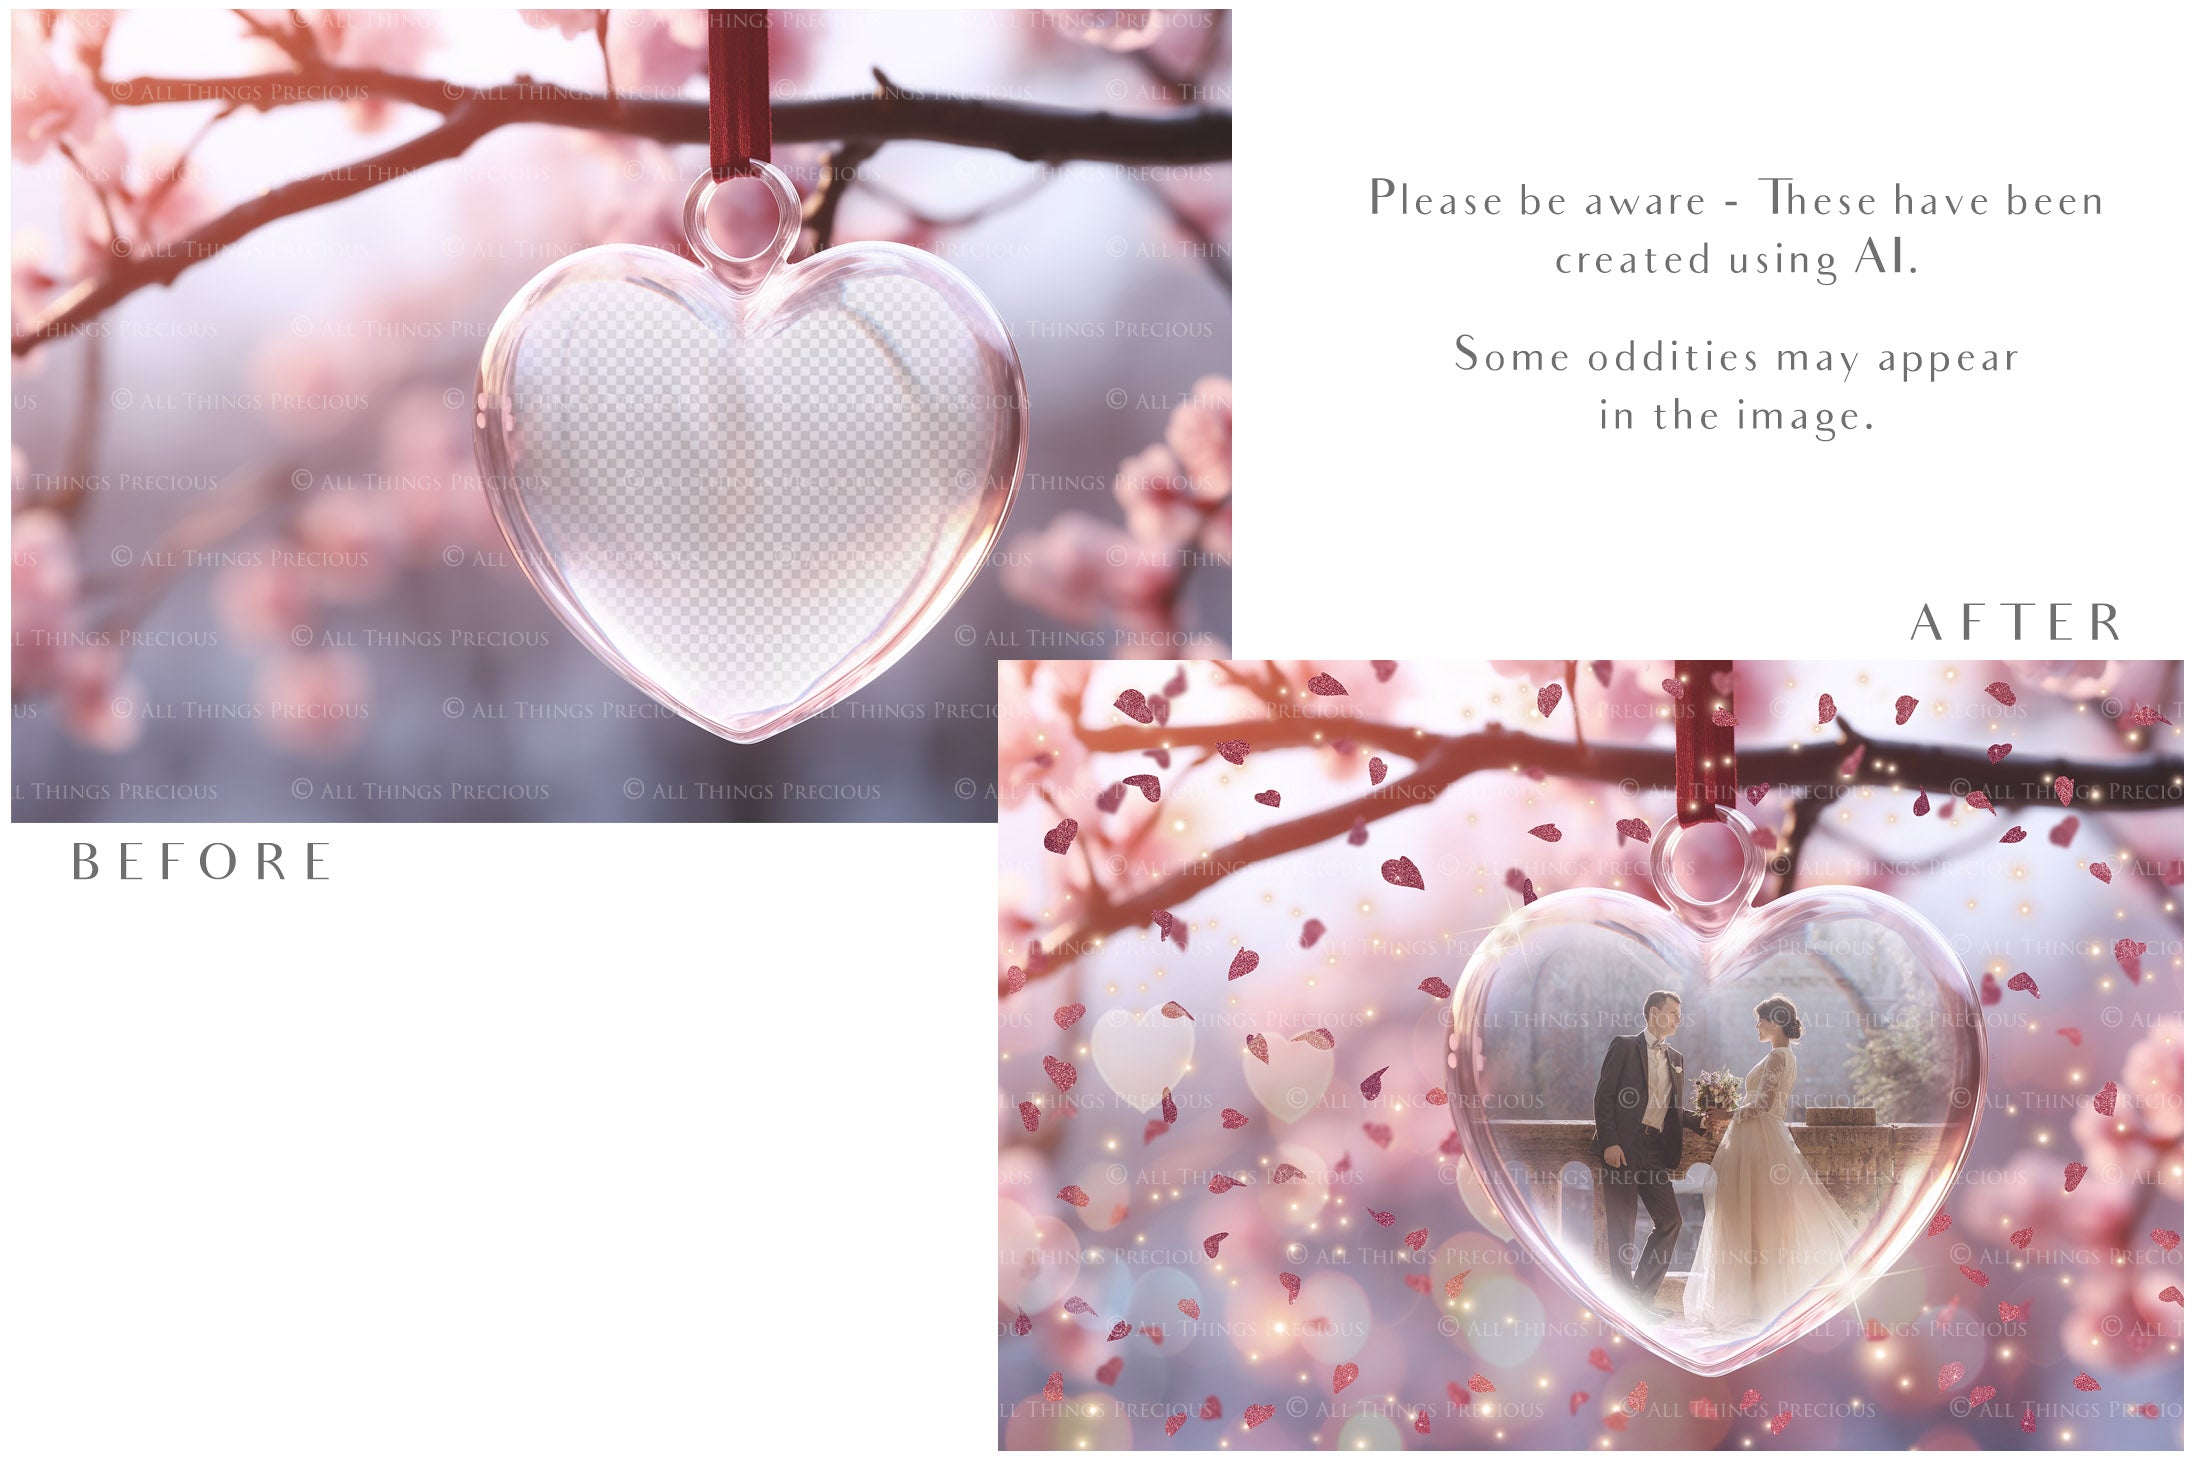 Valentines, Newborn, Wedding Announcement PSD template and Overlays. Digital Background, with Glows and petals. The heart shaped globe is transparent, perfect for you to add your own images and retain the glass globe effect.This file is 6000 x 4000, 300dpi. Photography, Scrapbooking, Png, Jpeg, Psd. ATP Textures.